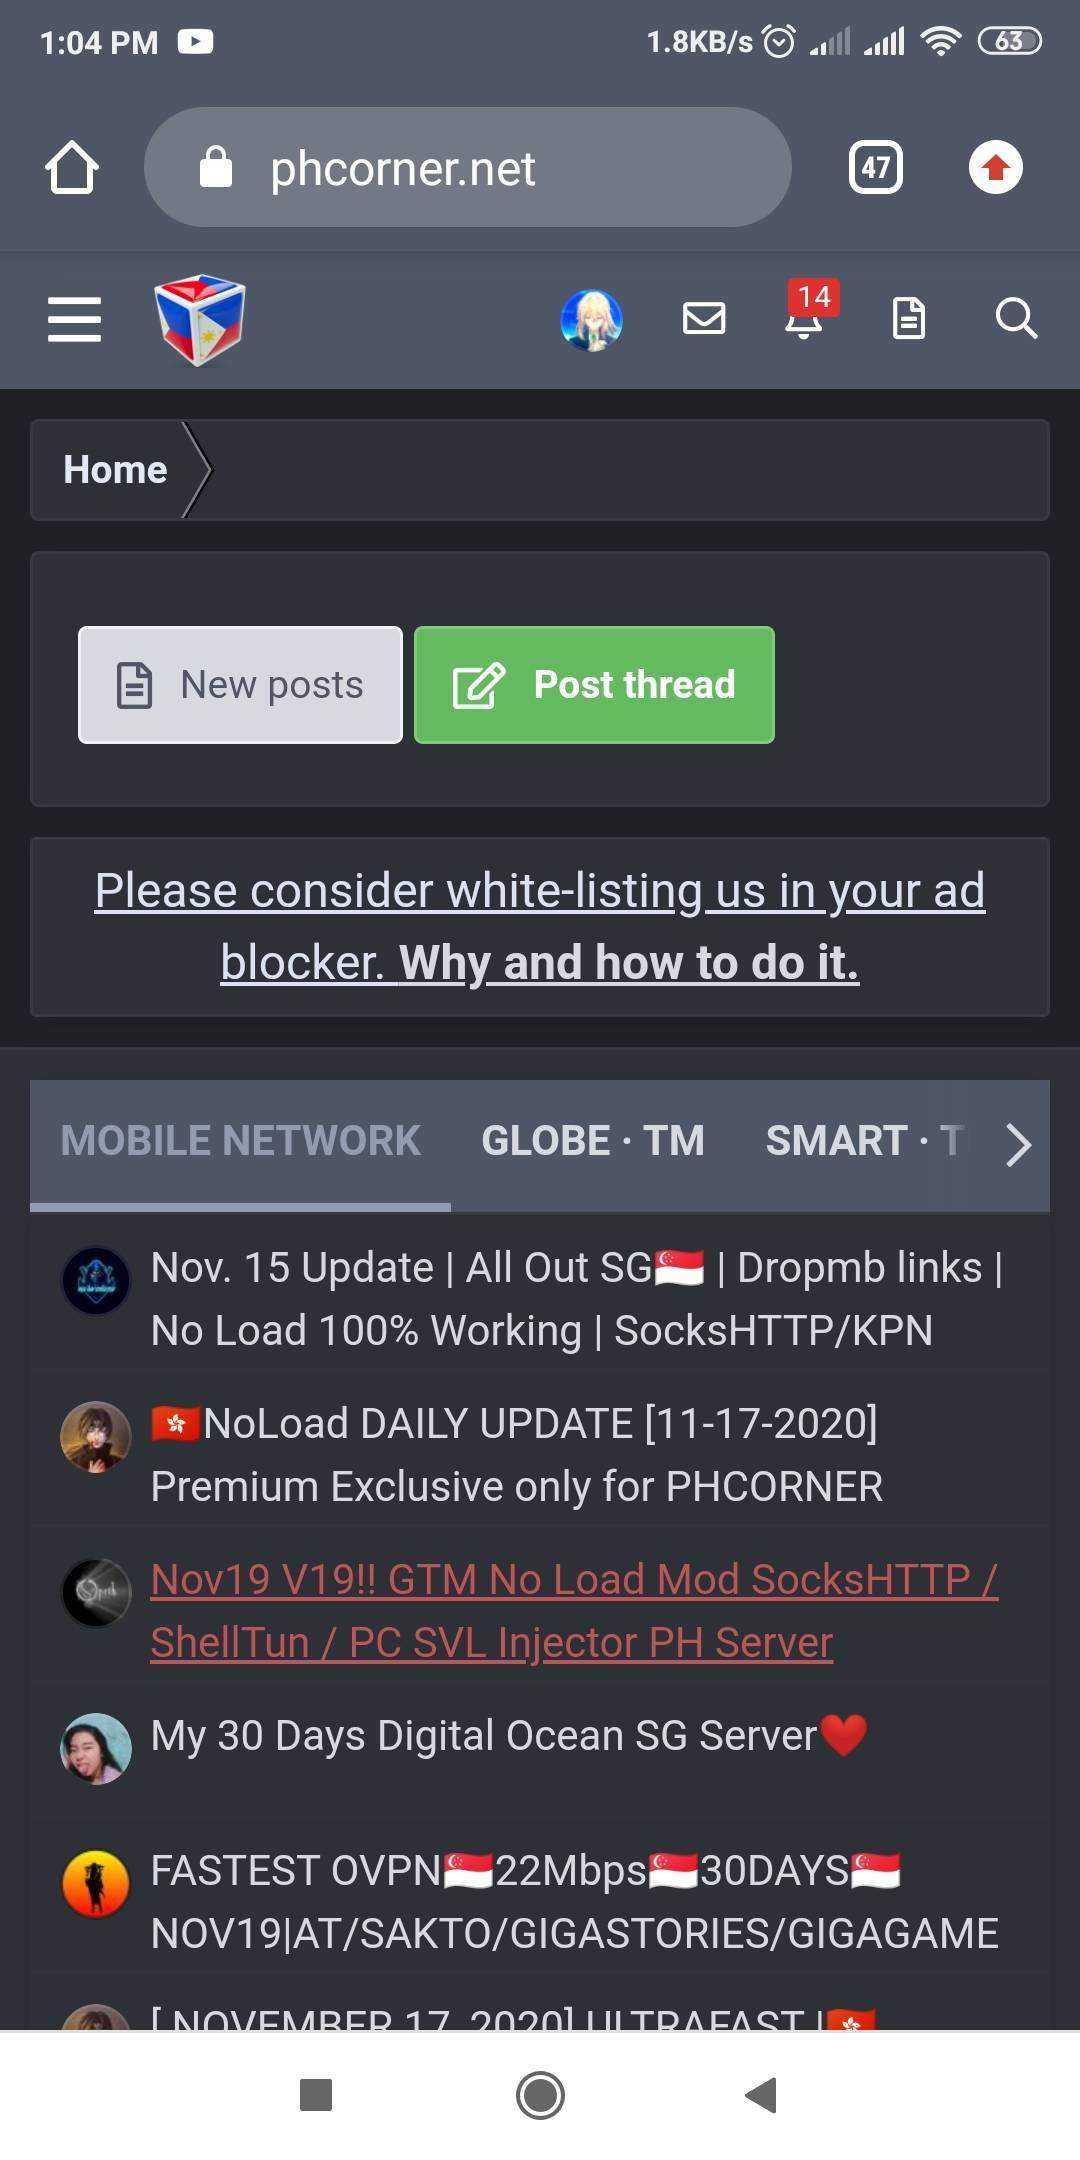 REMOVE ADS ON ALL SITES